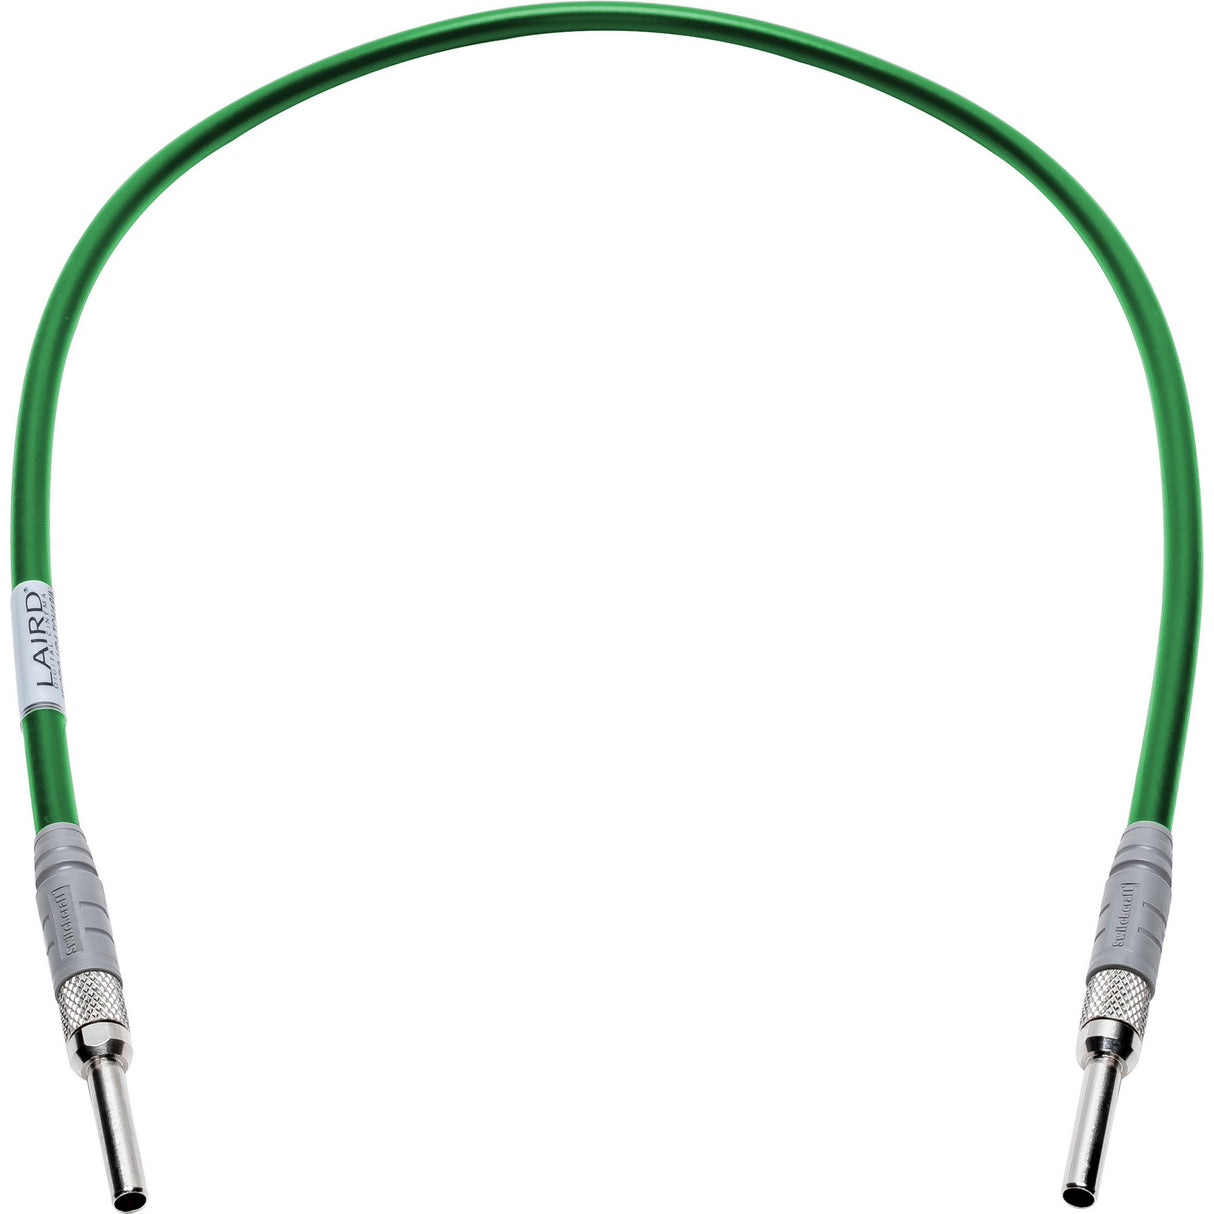 Laird MICRO-VPATCH-003GN 12G-SDI Micro Video Patch Cable, Military Green, 3-Feet